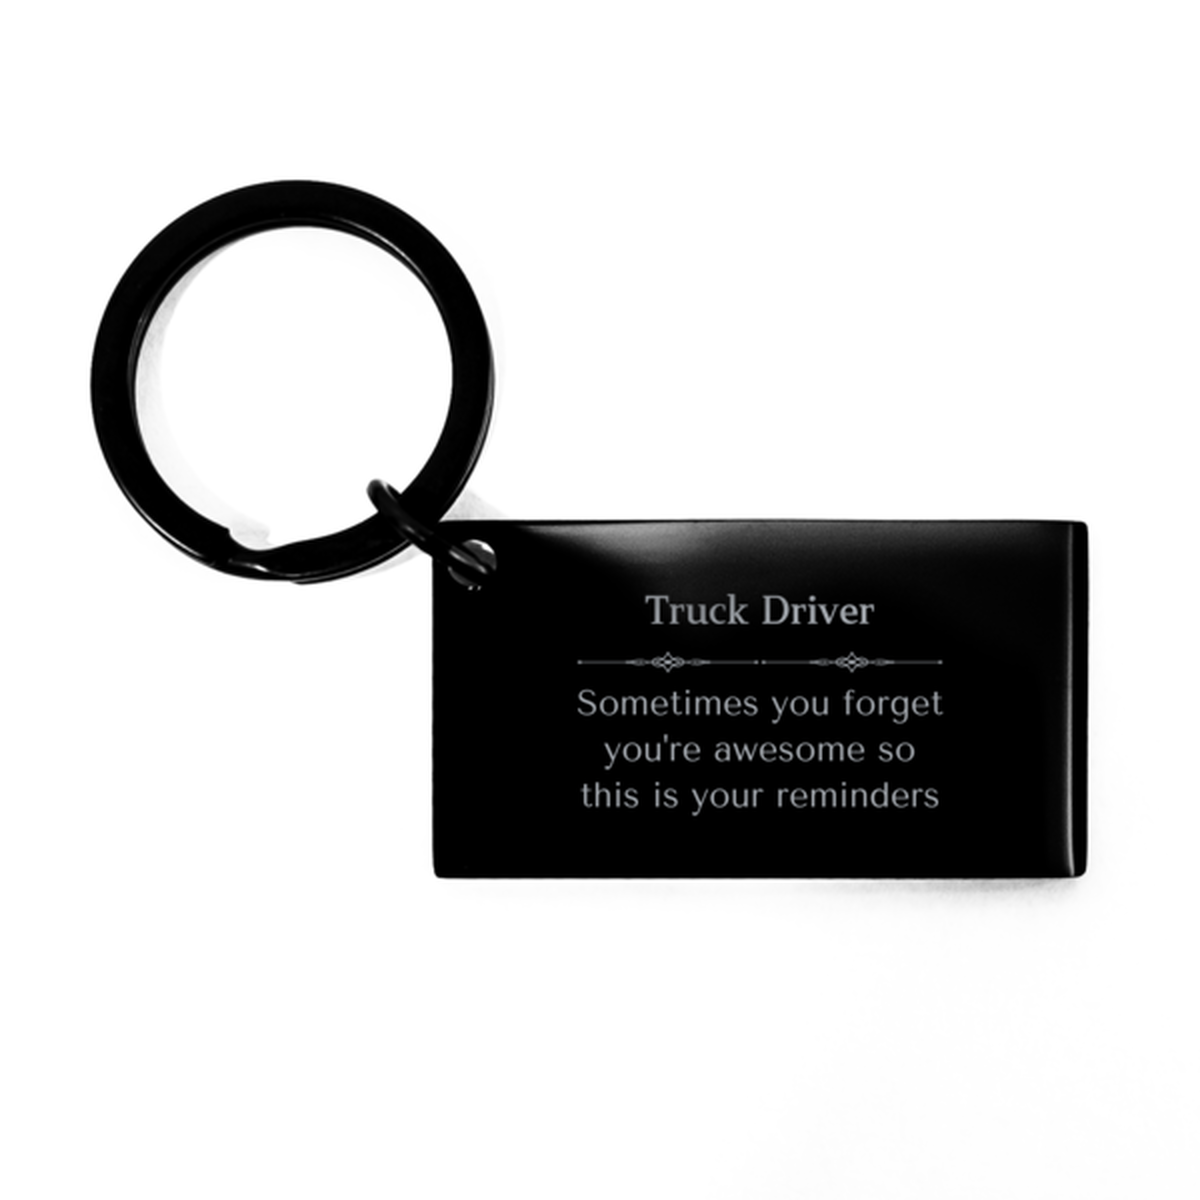 Sentimental Truck Driver Keychain, Administrative Assistant Sometimes you forget you're awesome so this is your reminders, Graduation Christmas Birthday Gifts for Truck Driver, Men, Women, Coworkers